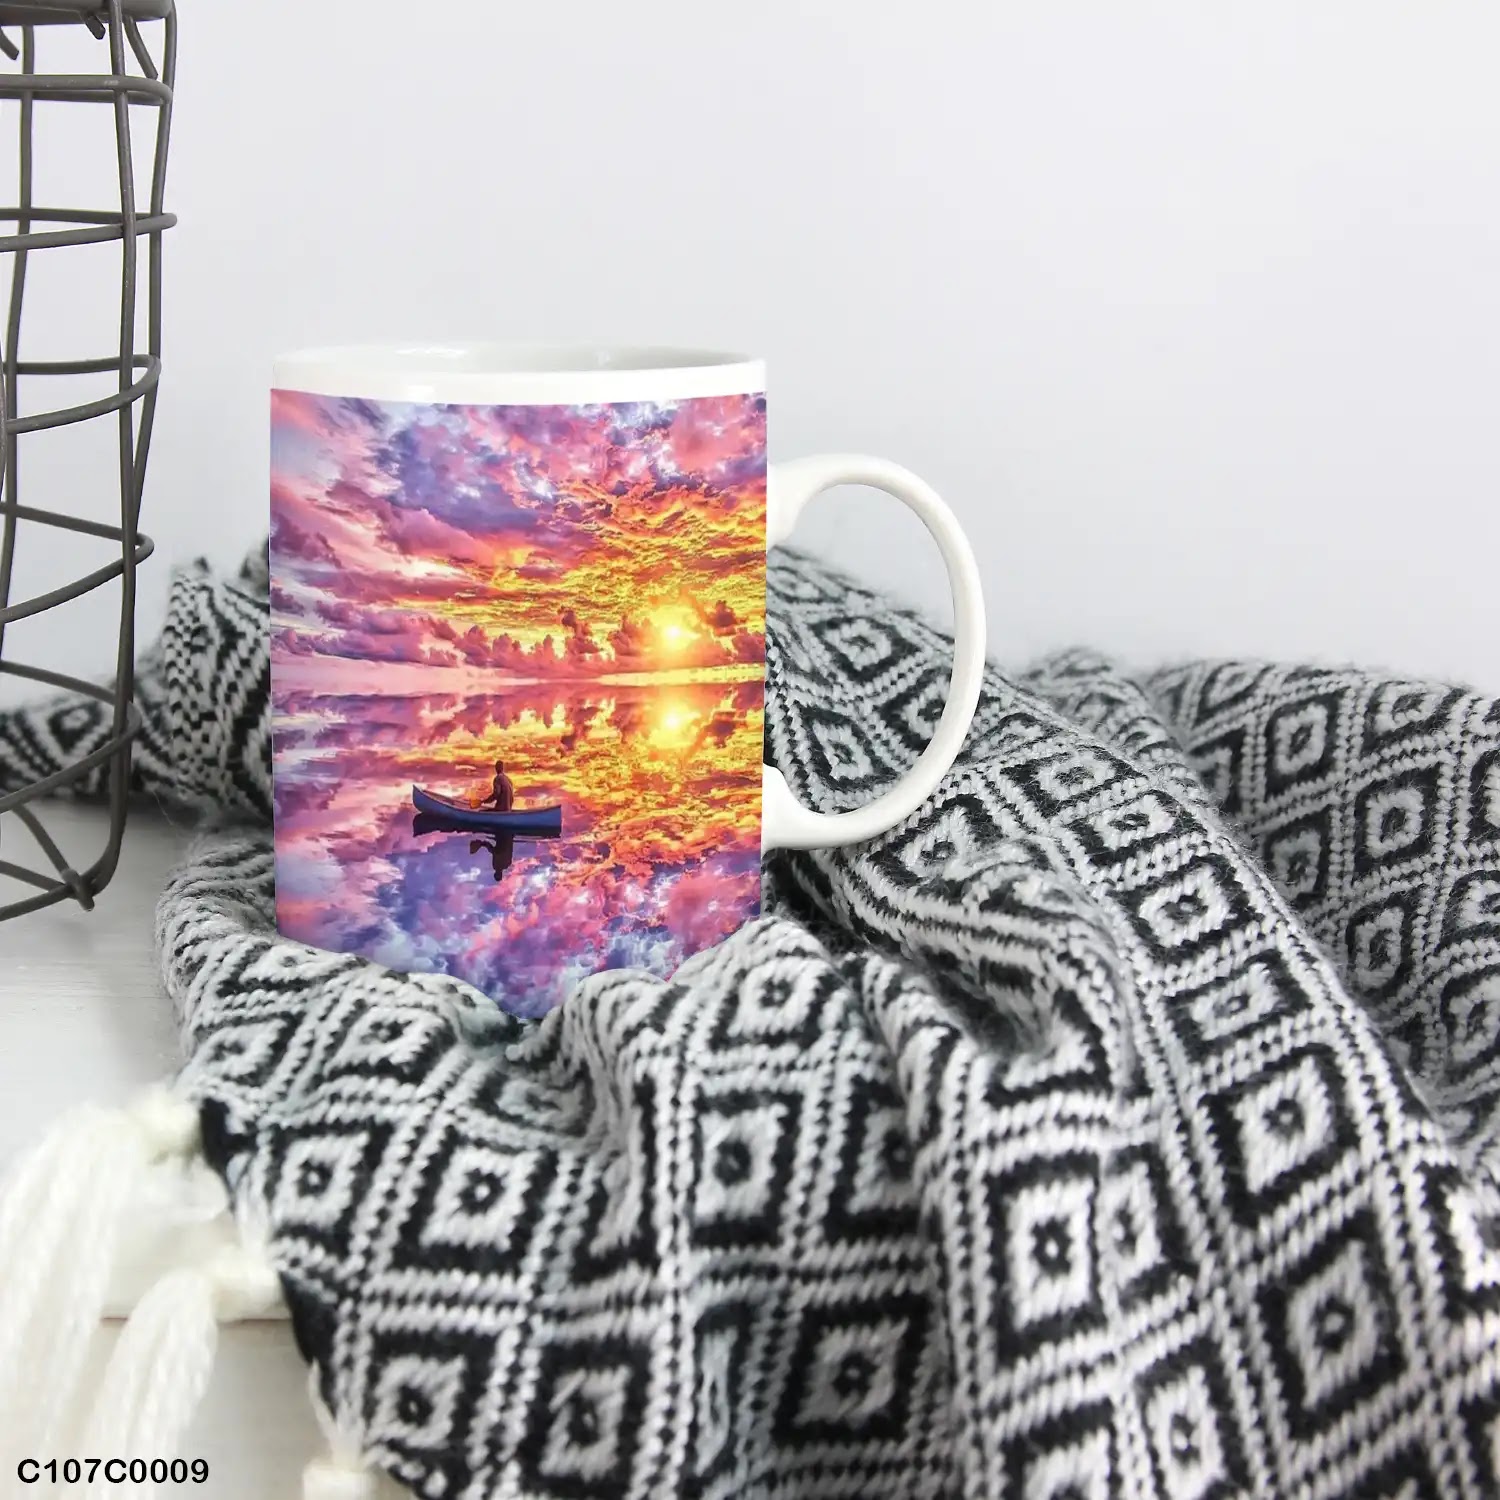 A mug (cup) printed with an image of a boat and lake at sunset